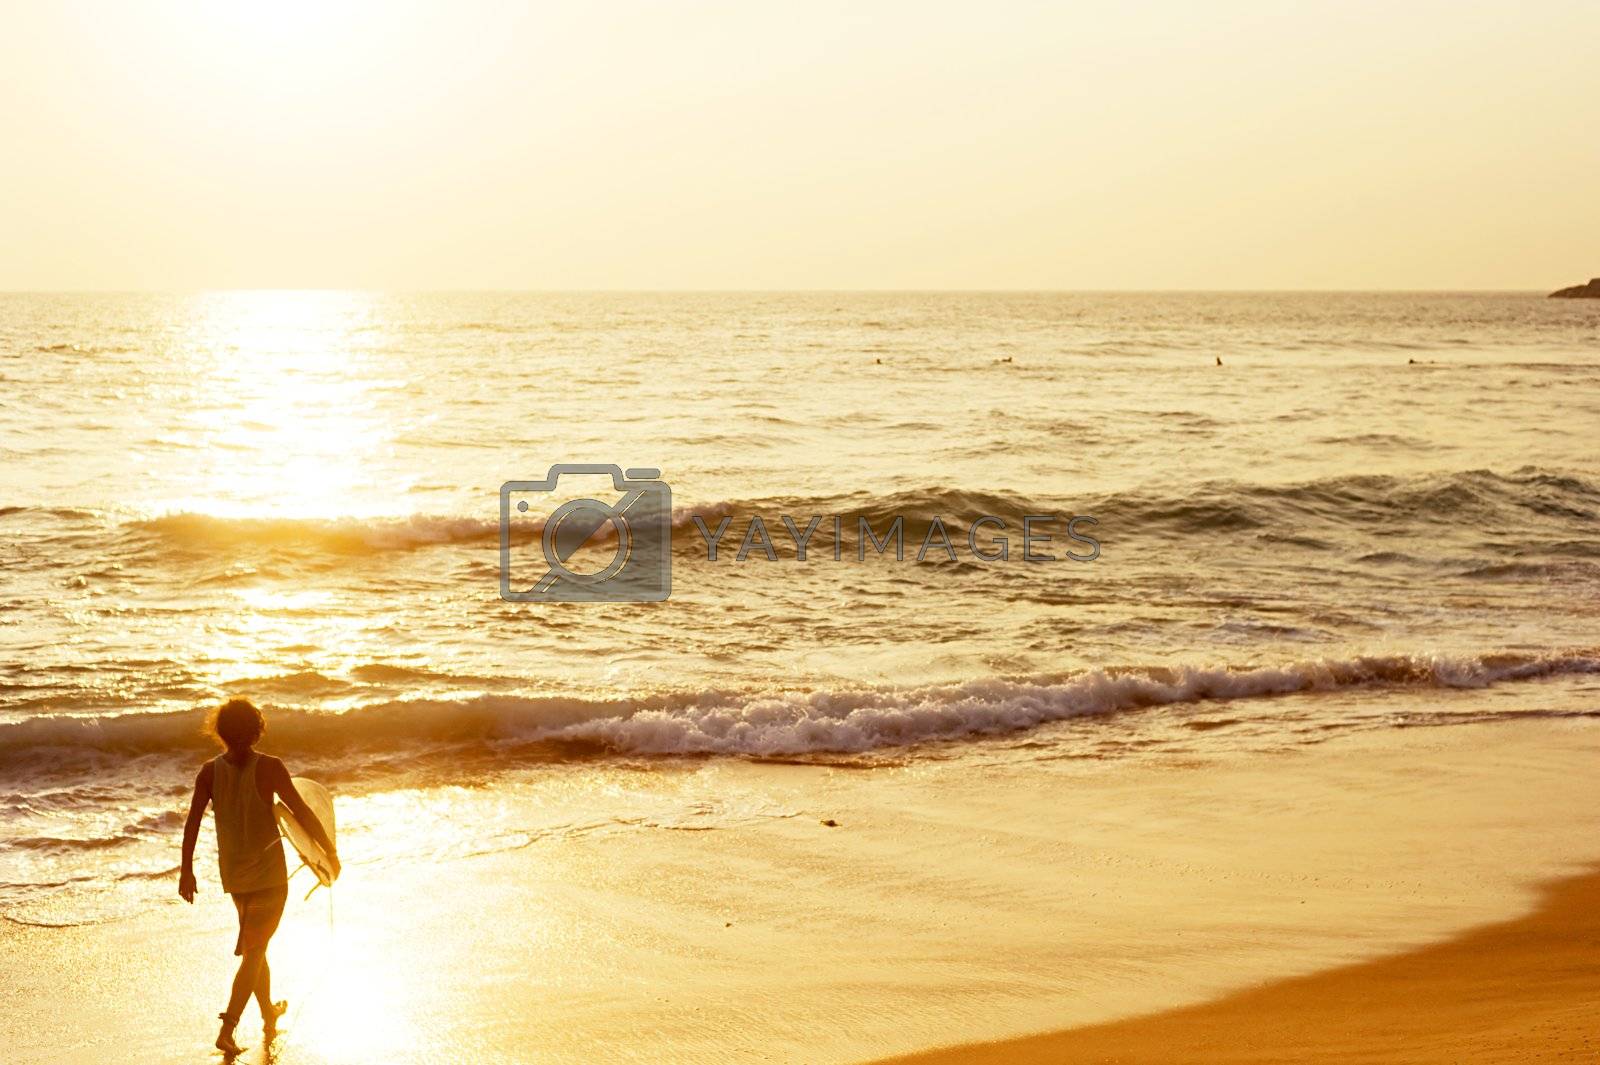 Royalty free image of Surfer on the beach by joyfull